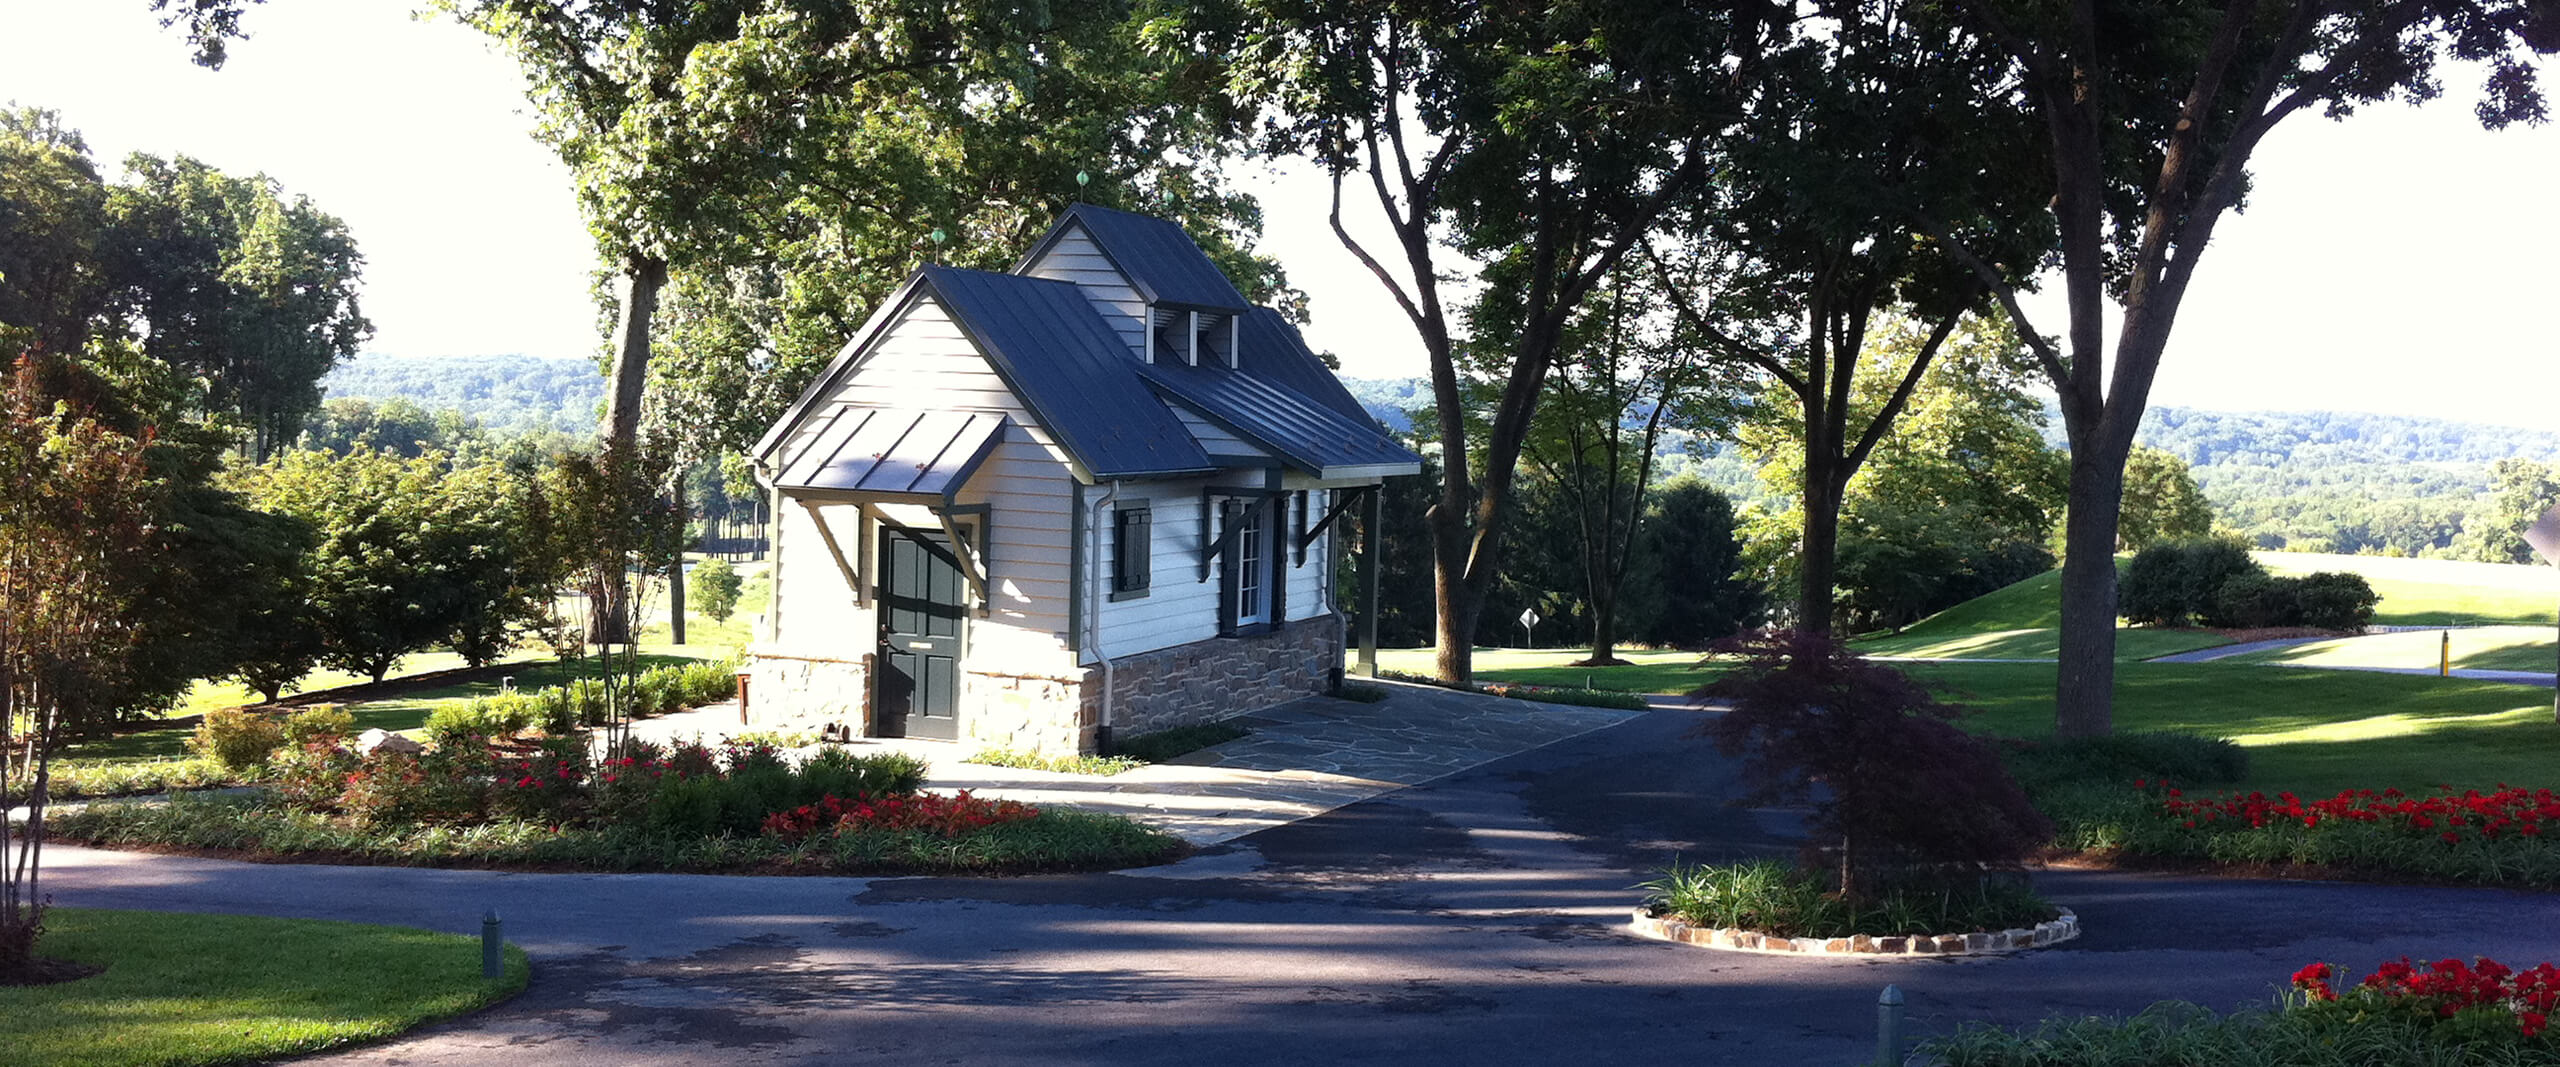 The halfway house at Caves Valley Golf Club